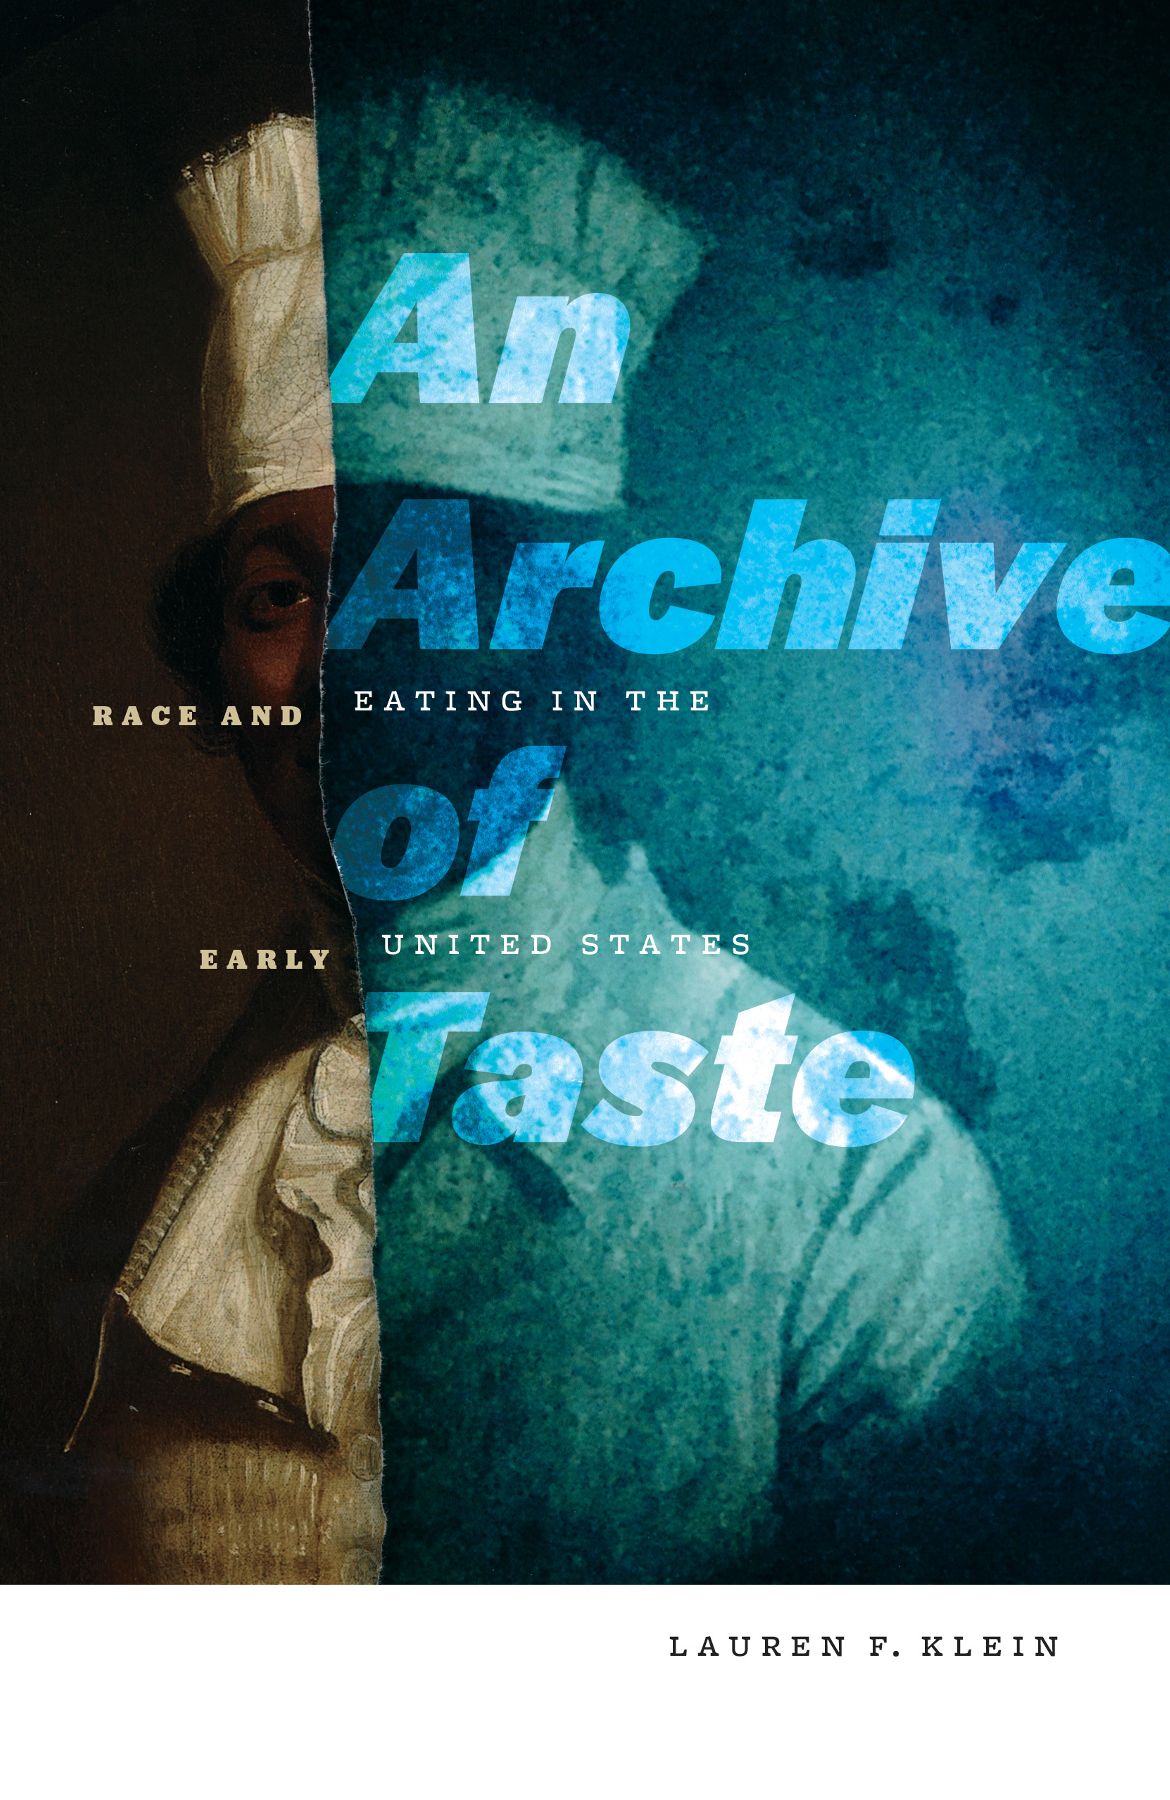 Cover image, featuring painting of a chef in the background